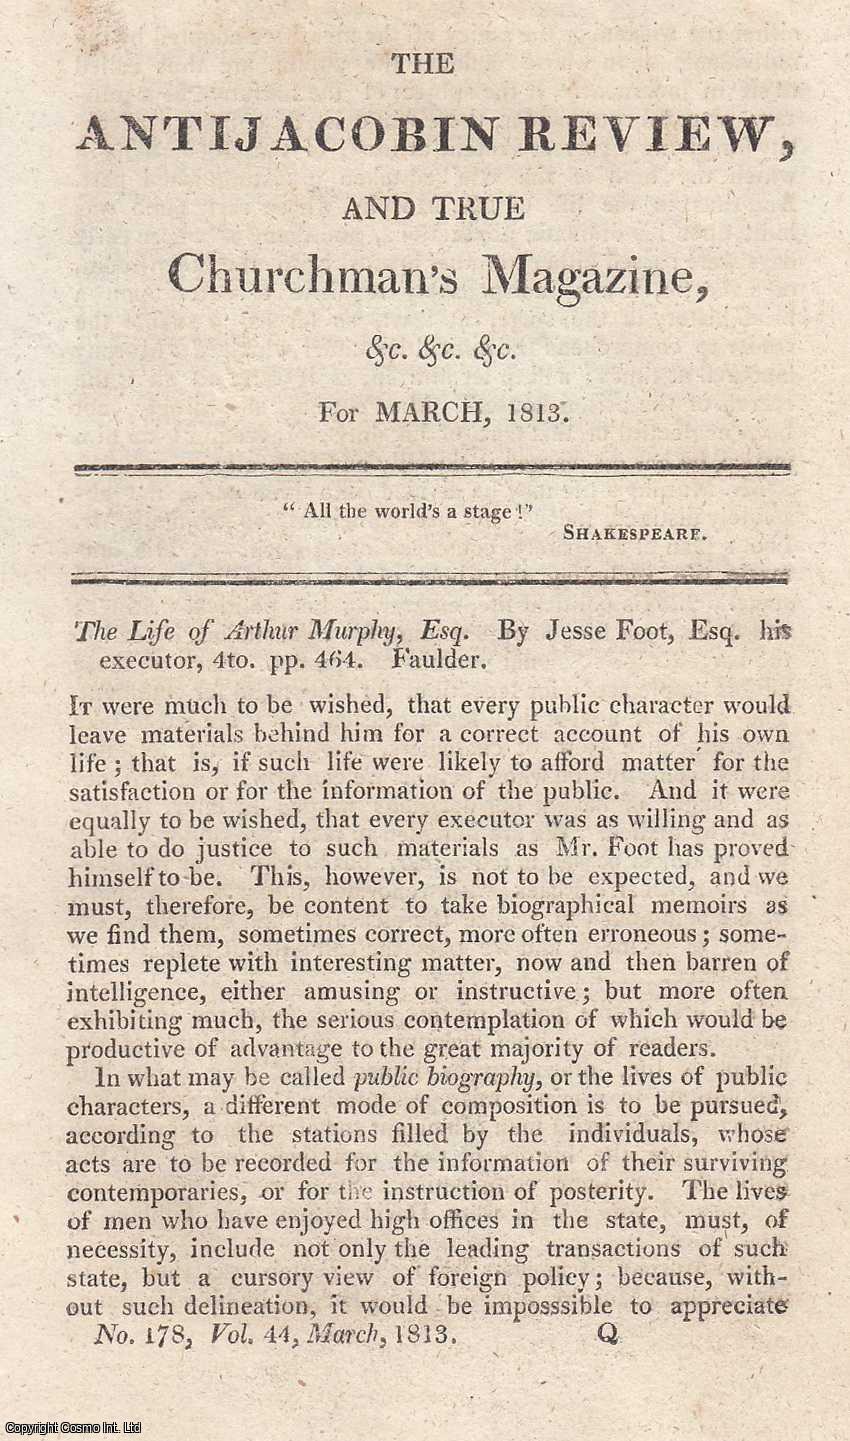 Actor, barrister, journalist, playwright - The Life of Arthur Murphy [Charles Ranger], by Jesse Foot. An original review article from The Anti-Jacobin Review and Magazine, 1813.